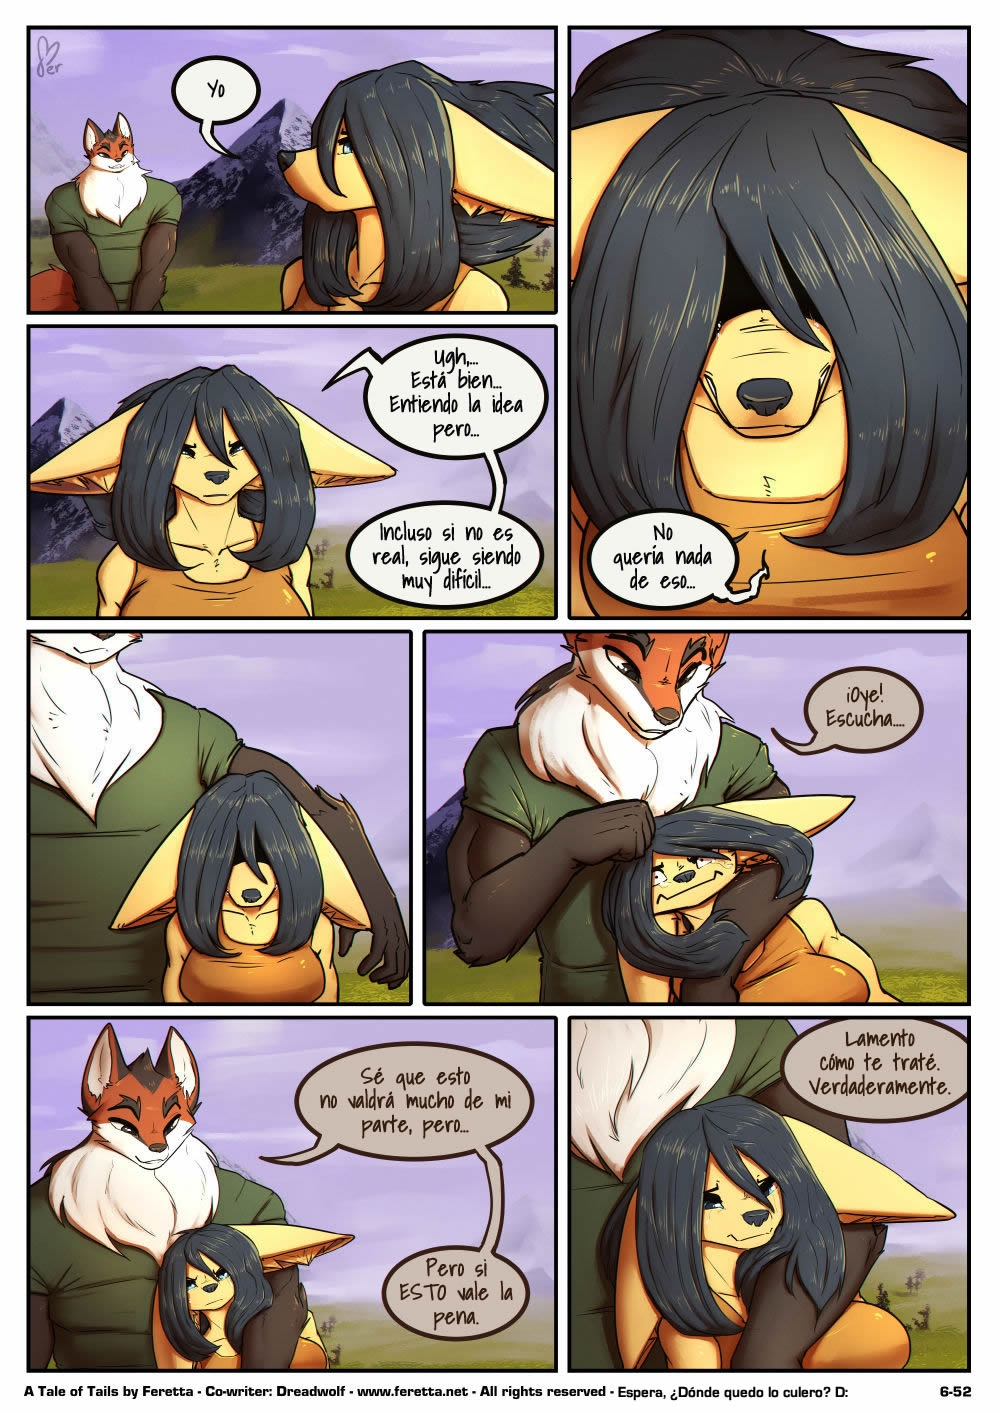 [Feretta] A Tale of Tails: Chapter 6 - Paths converge / Los caminos convergen [Spanish] [Red Fox Makkan] 52